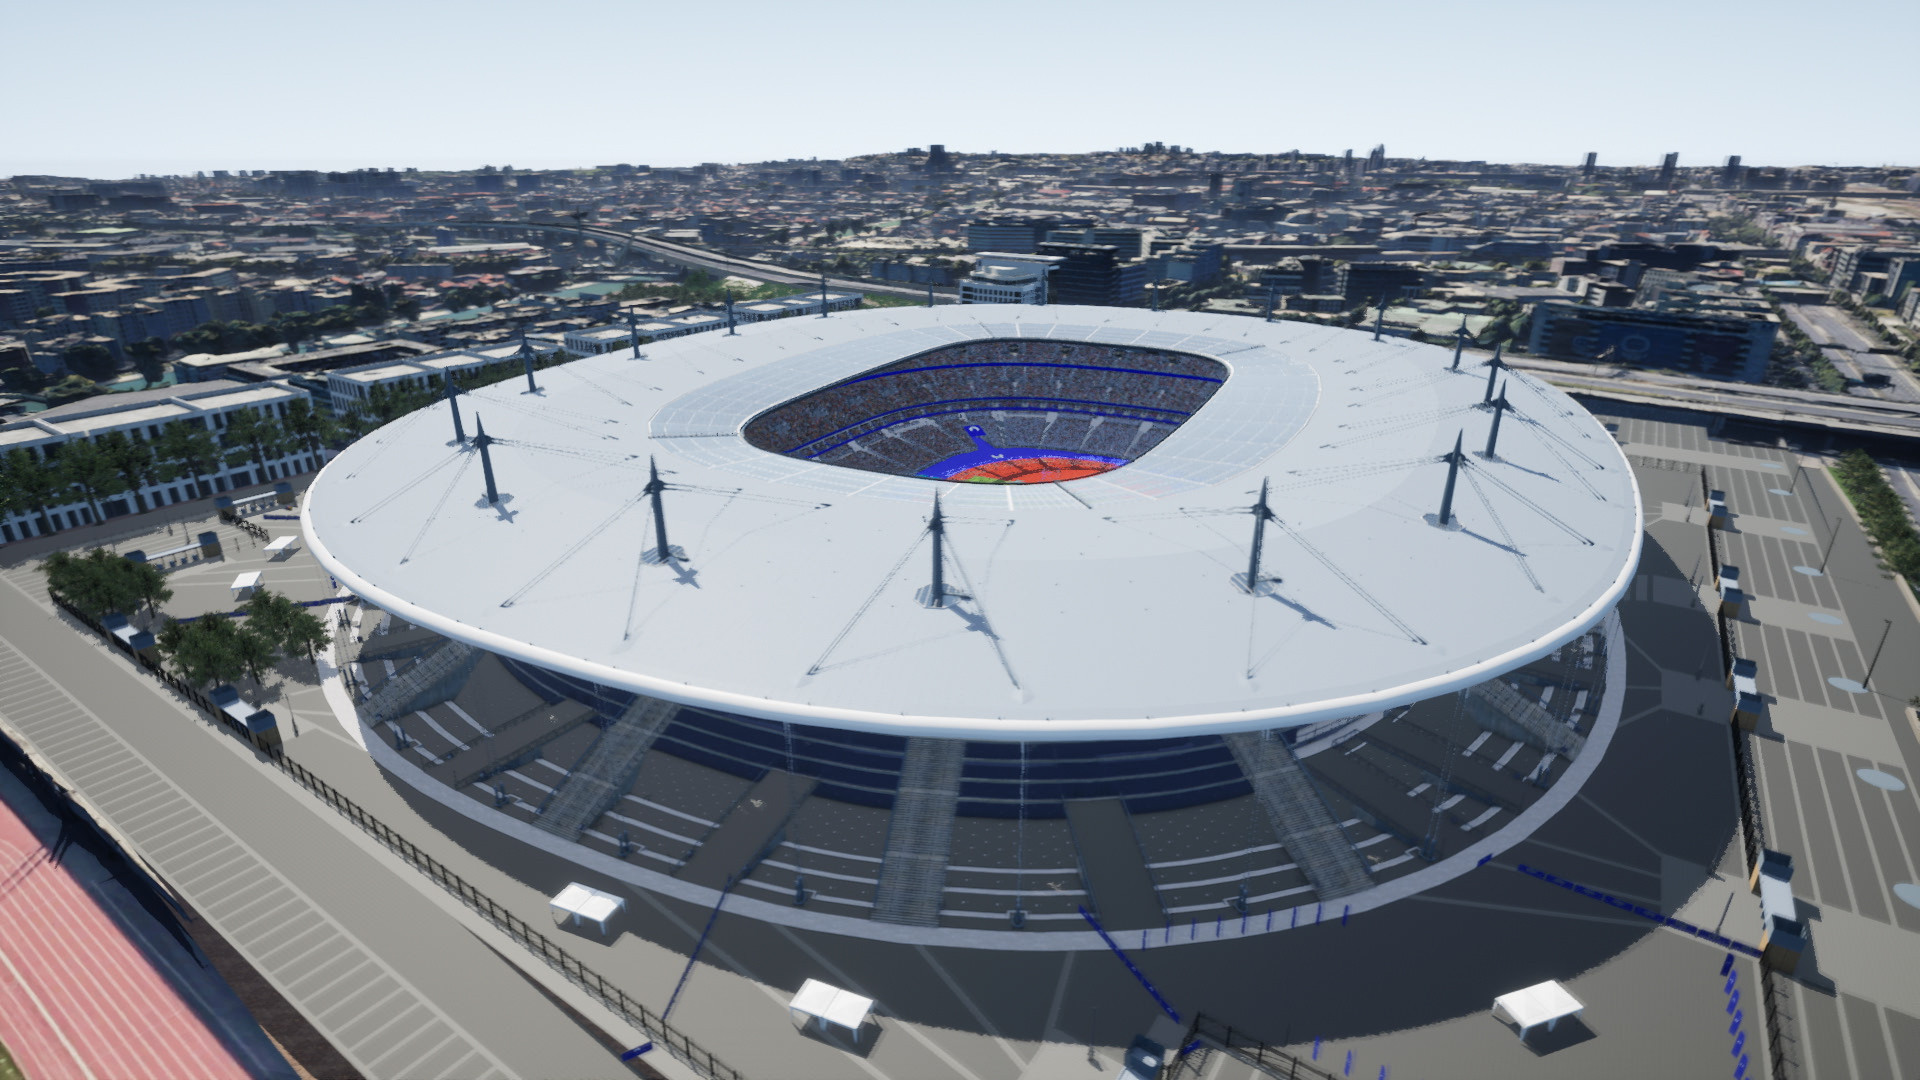 The Stade de France has been digitally replicated by OnePlan prior to the Paris 2024 Olympic and Paralympic Games ©OnePlan